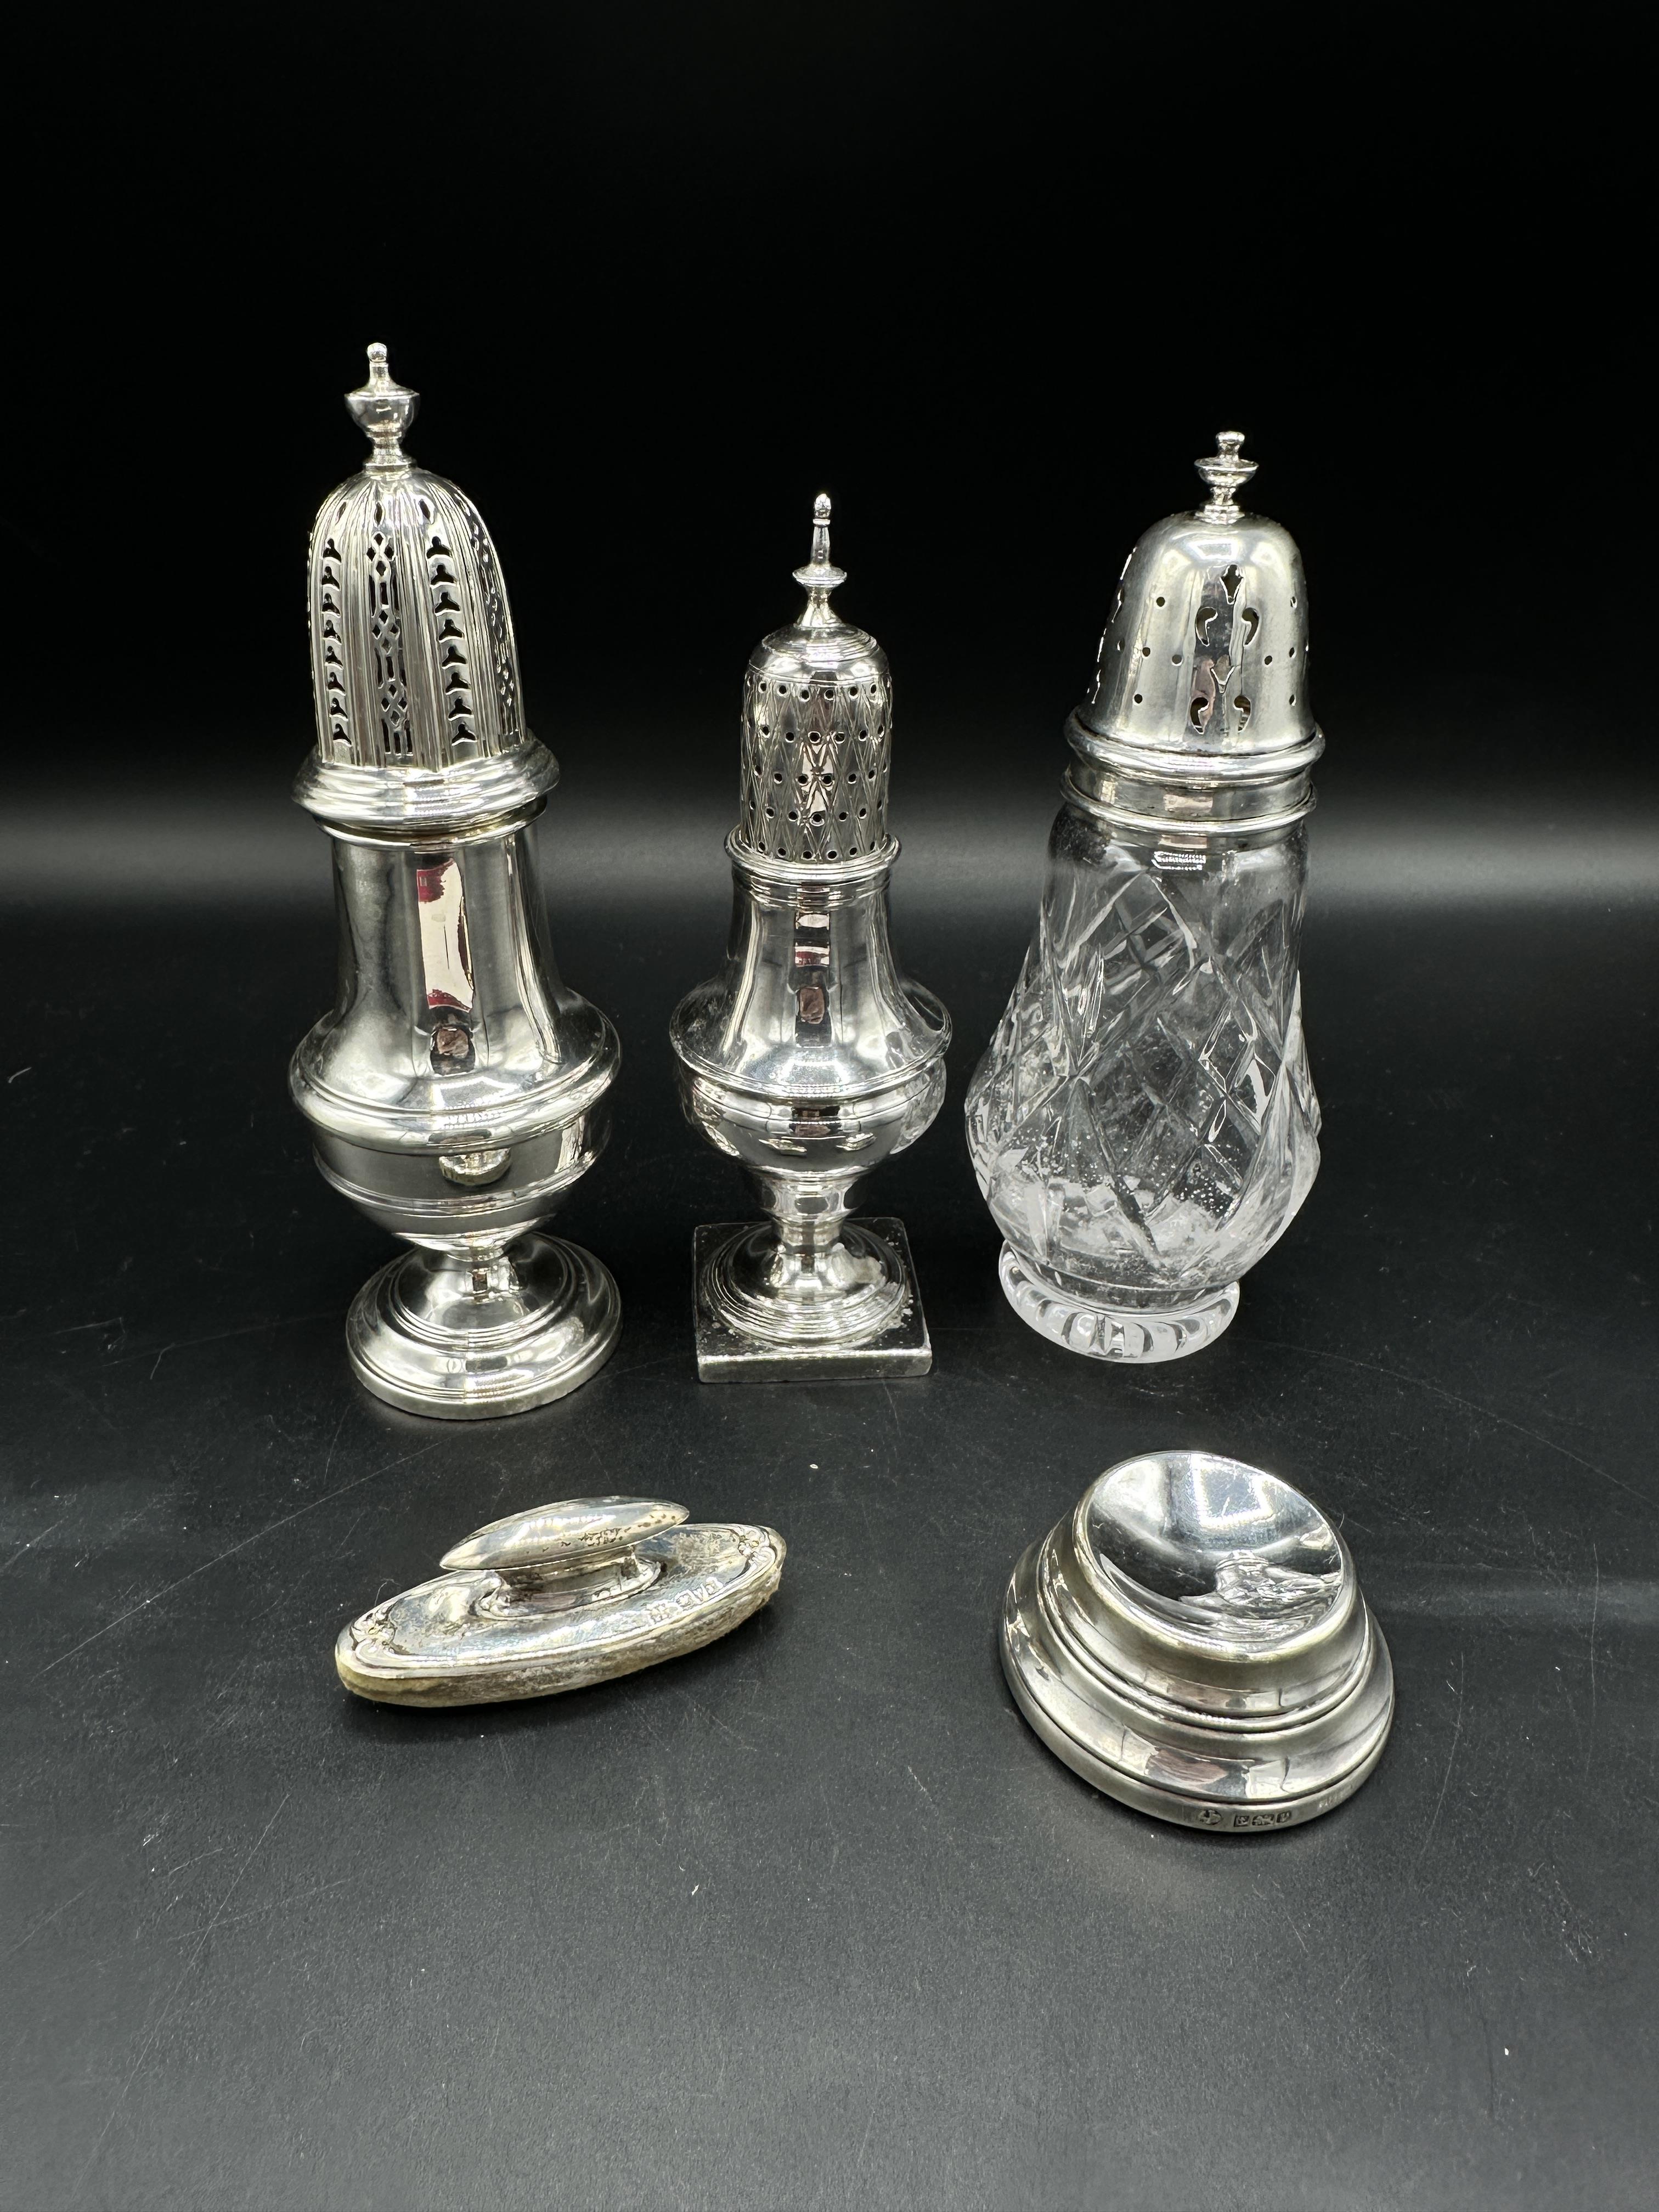 Two silver sugar casters together with a glass and silver sugar caster - Image 4 of 10